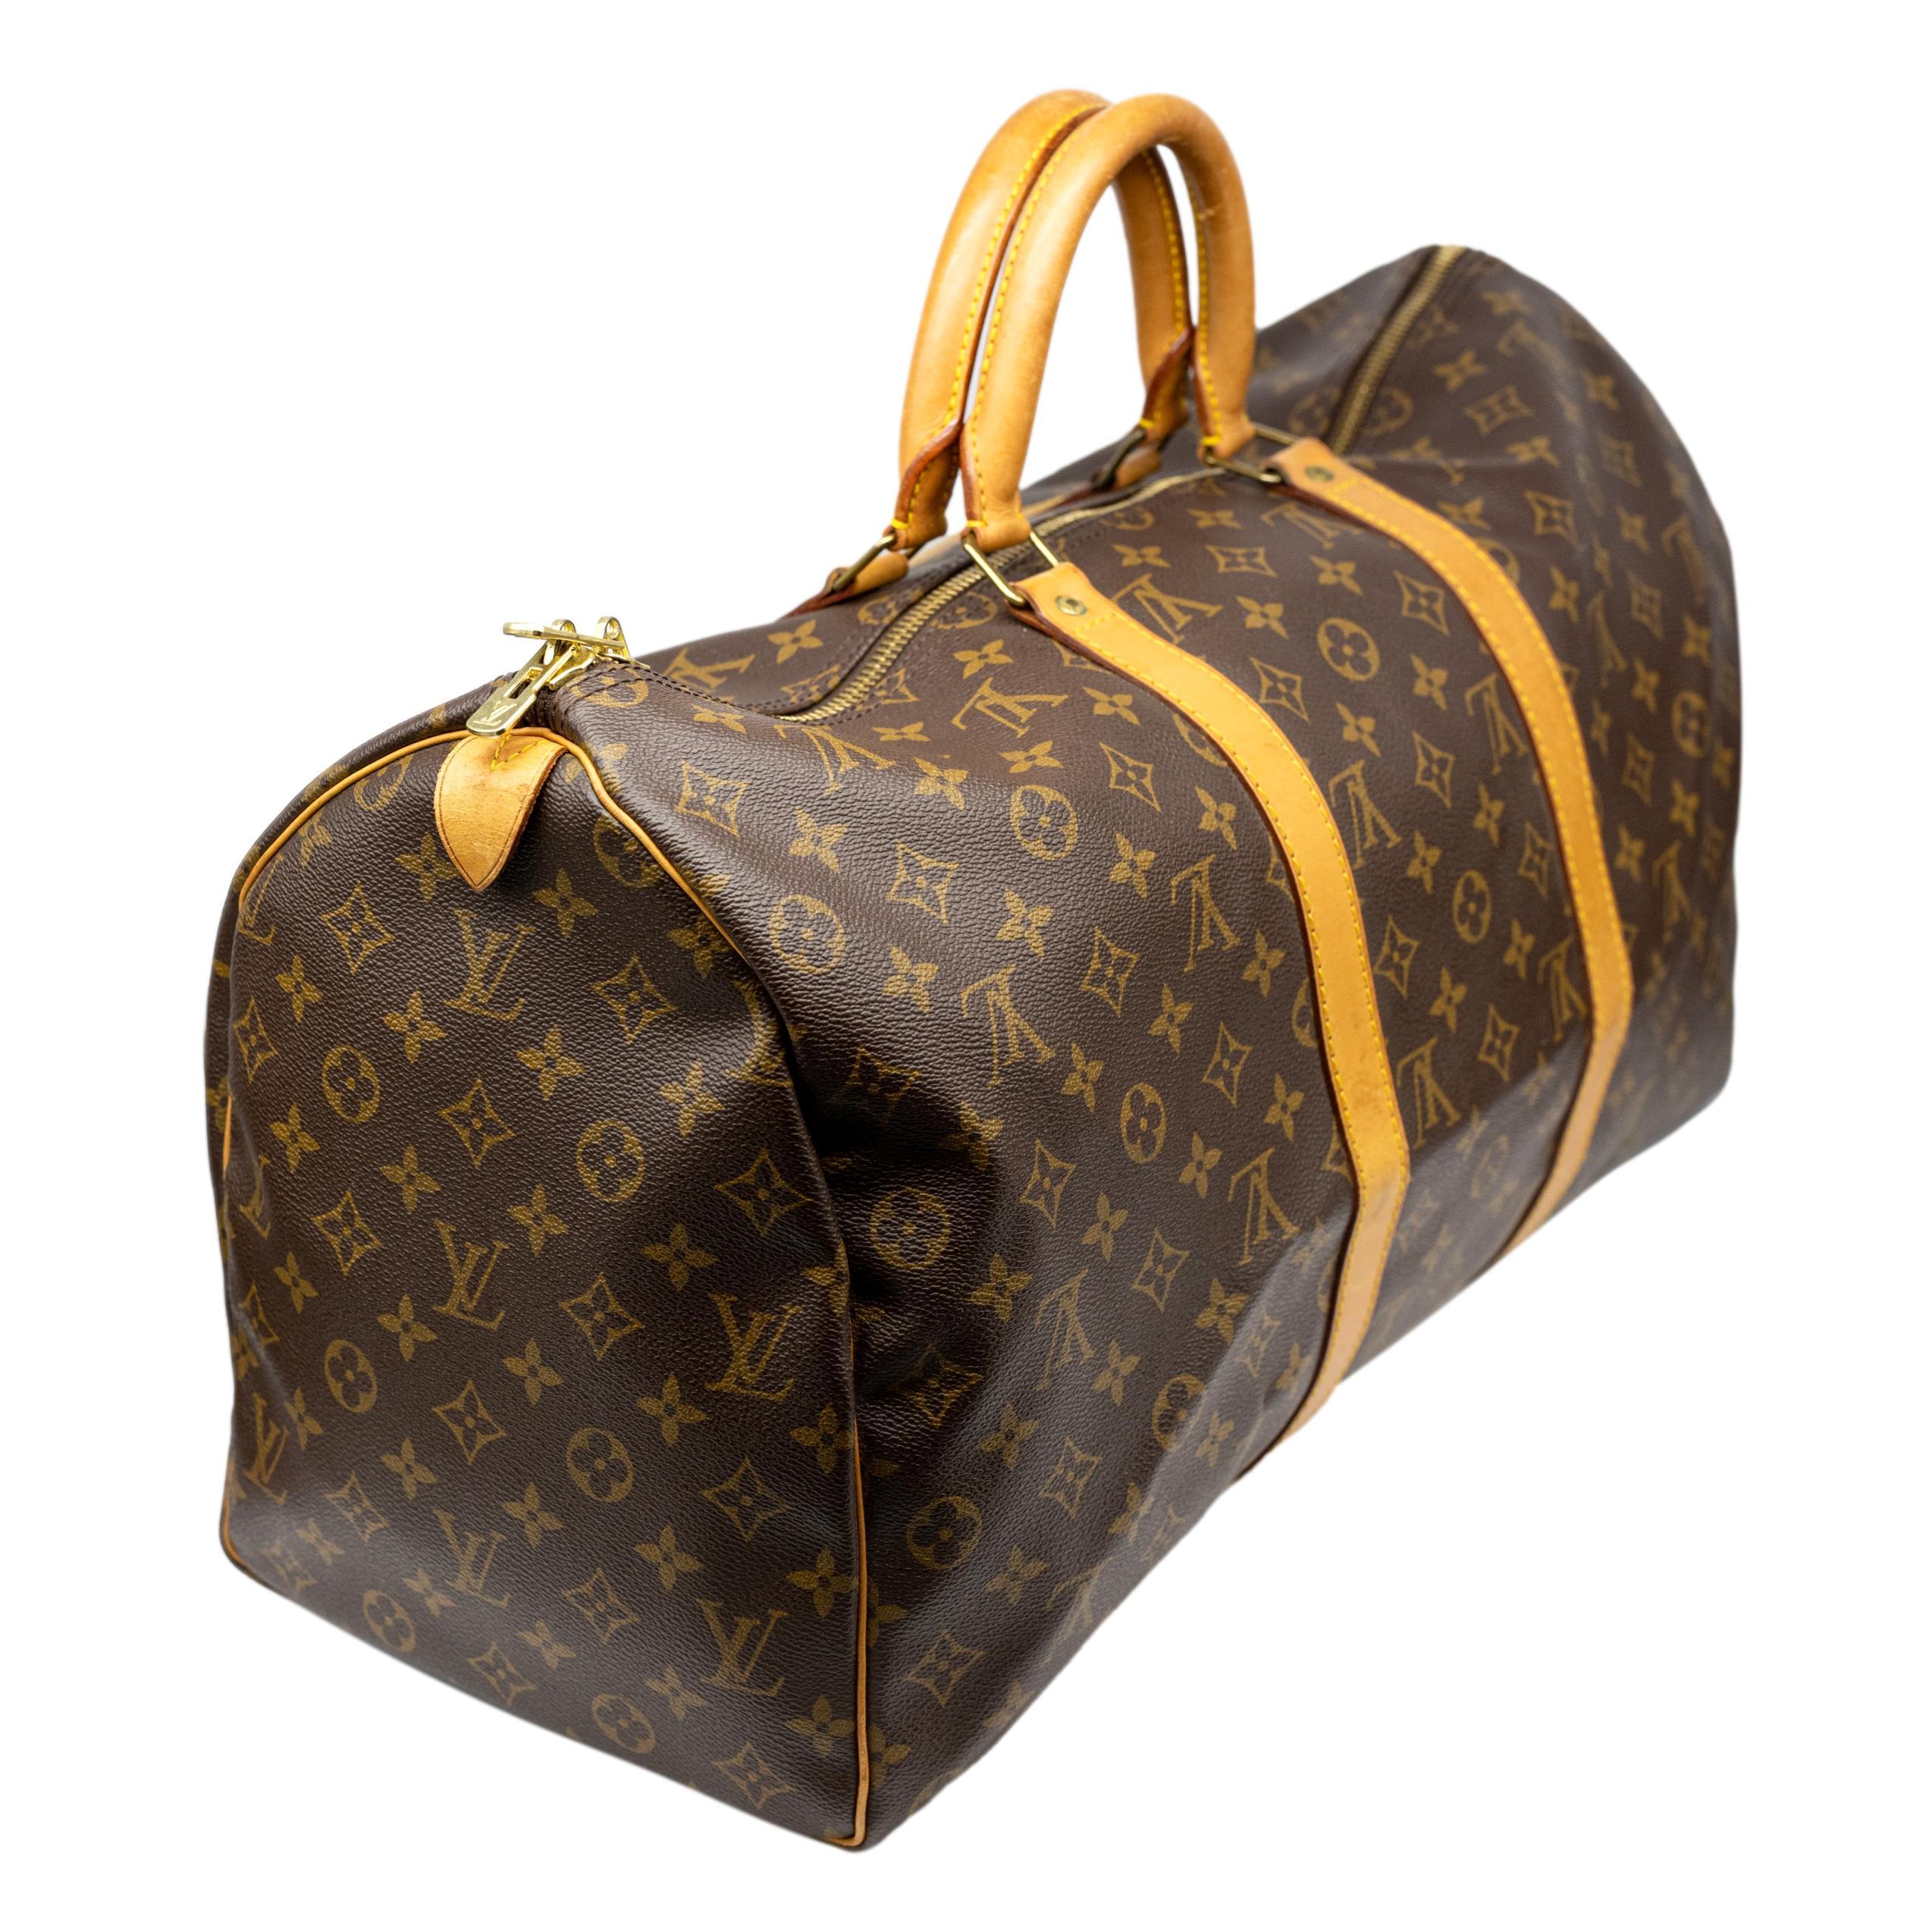 Louis Vuitton Monogram Keepall 50 Duffle Carry-On Travel Bag, France 1982. This iconic keepall was first introduced in the 1930's by Gaston Vuitton as the city 